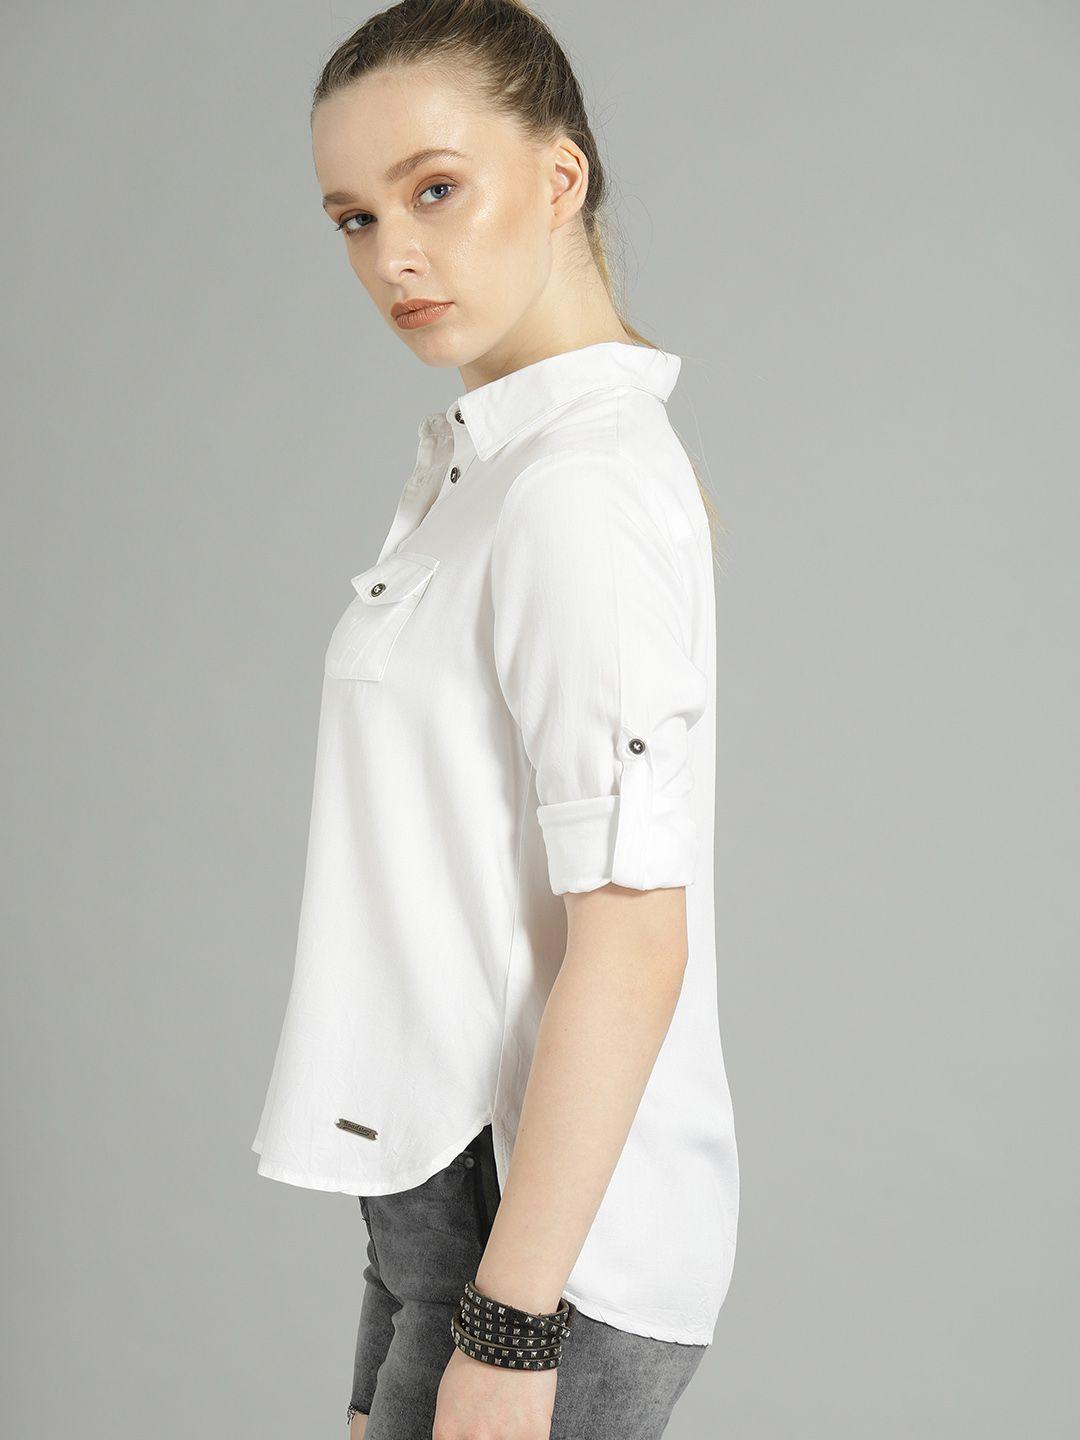 the-roadster-lifestyle-co-women-white-regular-fit-solid-casual-shirt